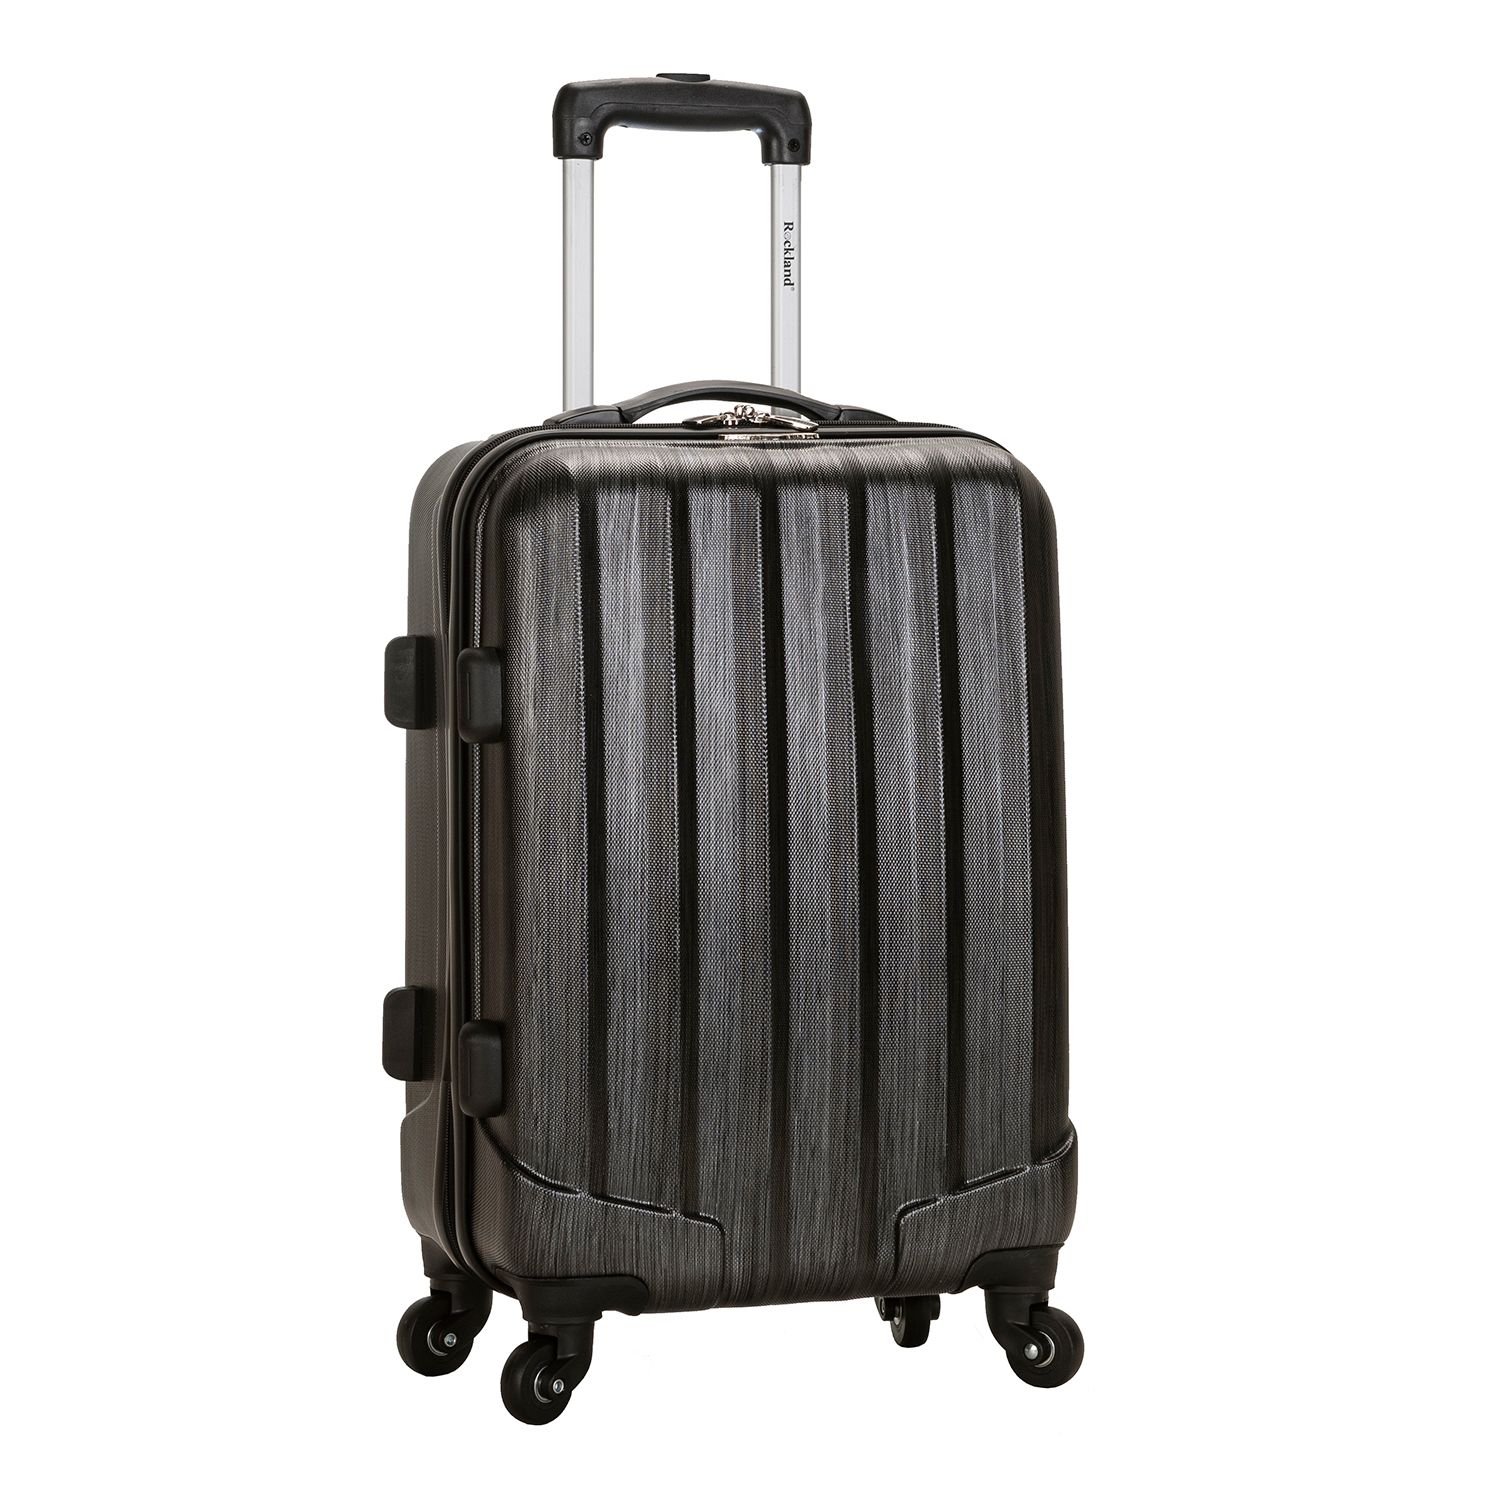 rockland luggage melbourne 20 inch expandable carry on